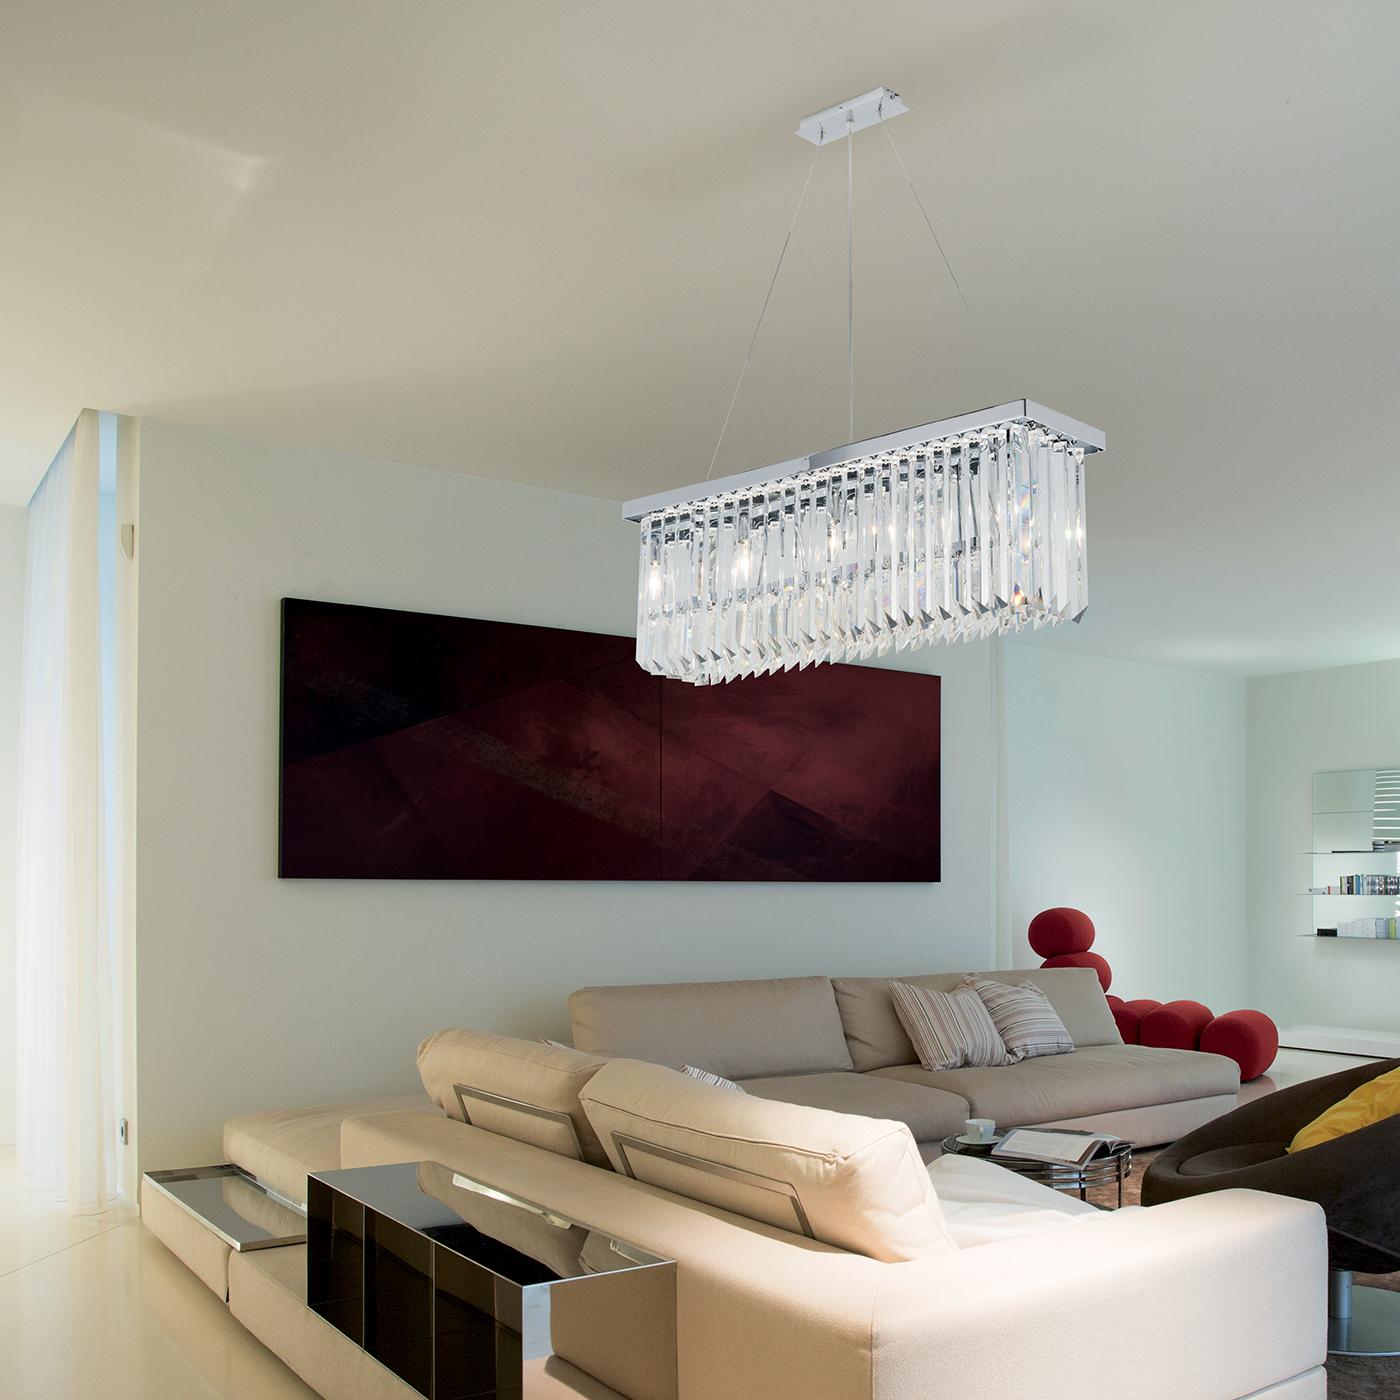 This rectangular pendant light is crafted from clear lead crystal, offering a modern take on a classic chandelier style. Transforming any dining area when hung directly above the table as a striking focal point, the crystal drop oblong pendant light